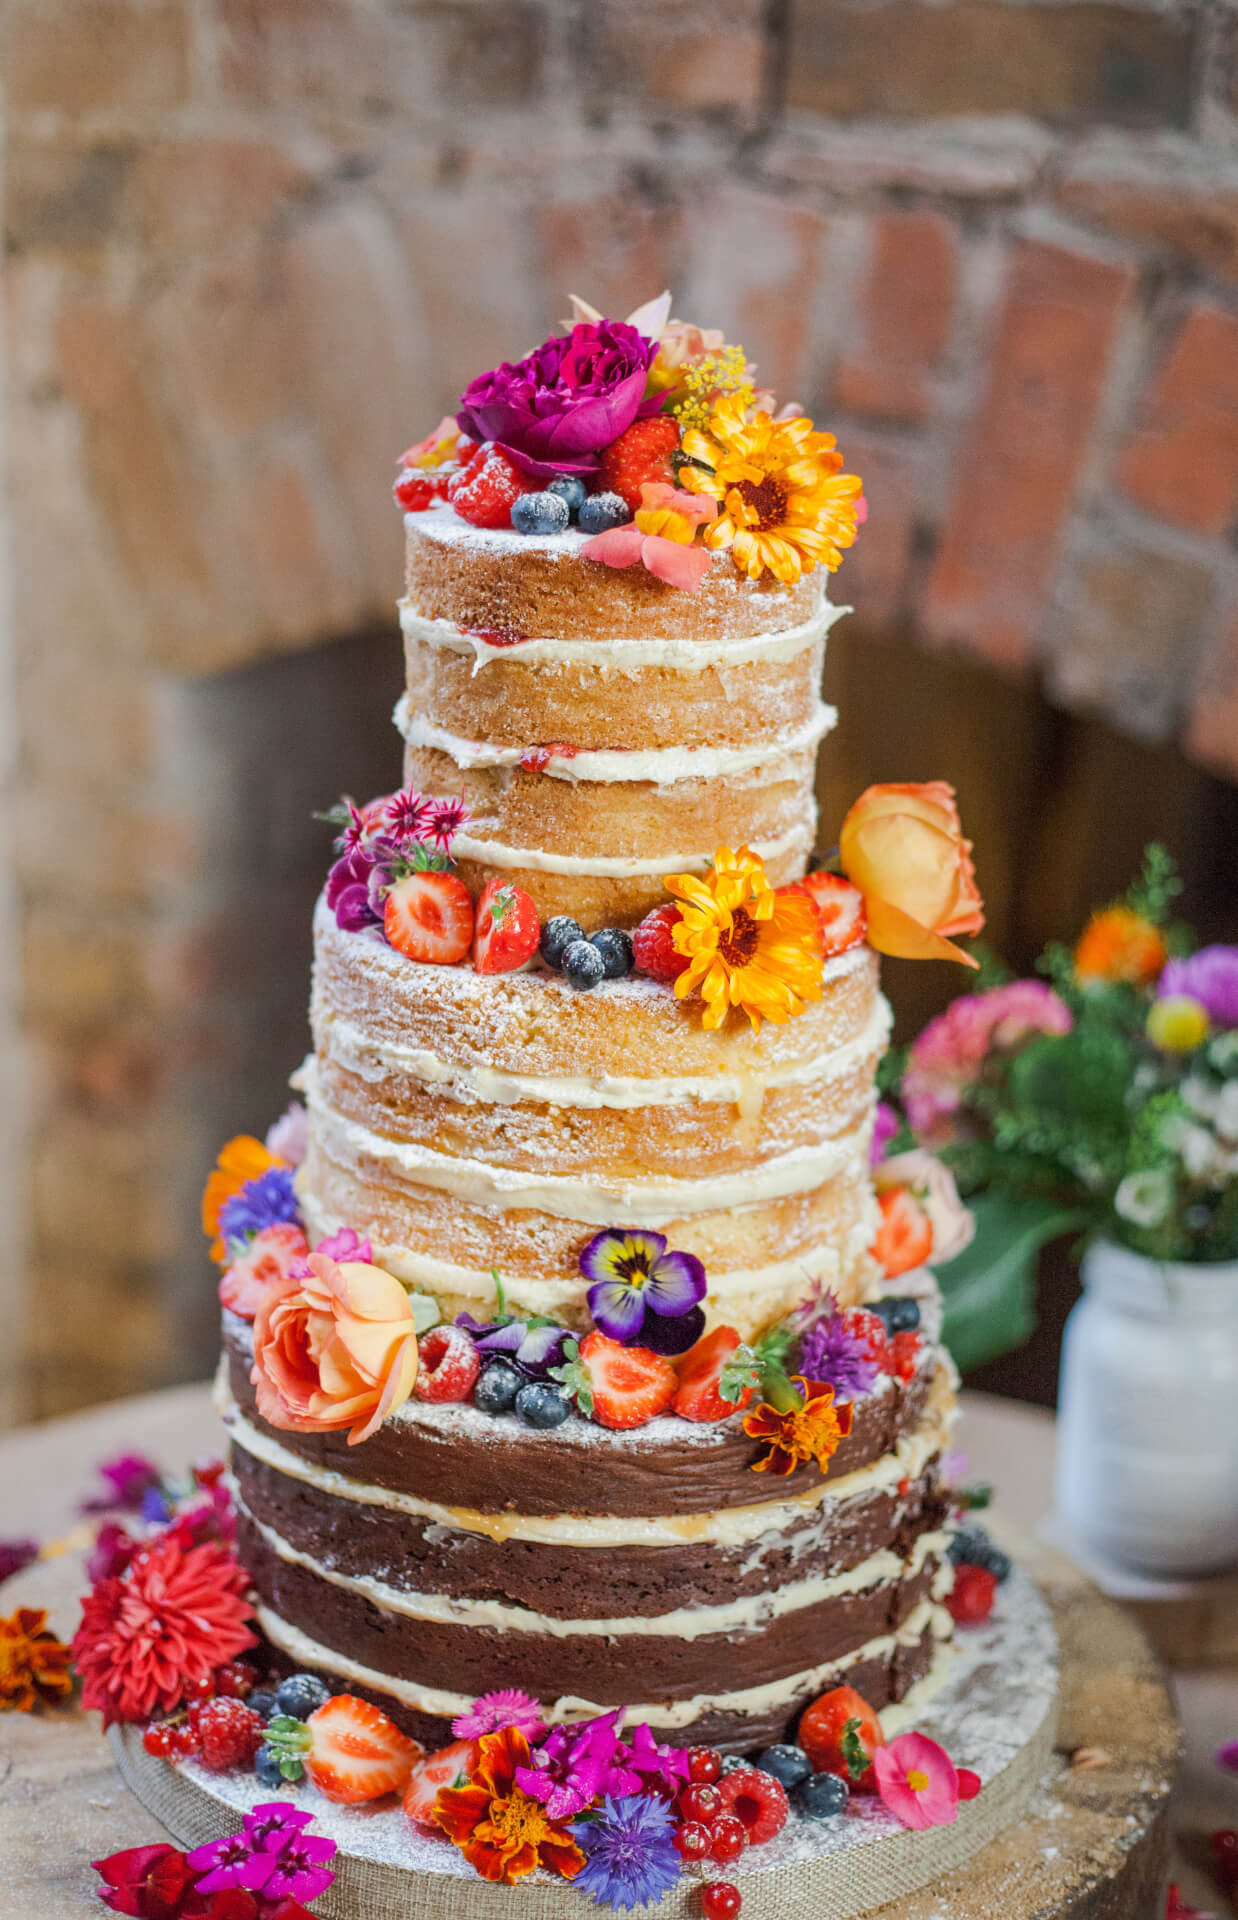 Wedding Cake With Flowers
 Edible Flowers for Naked Wedding Cakes Fresh Edible